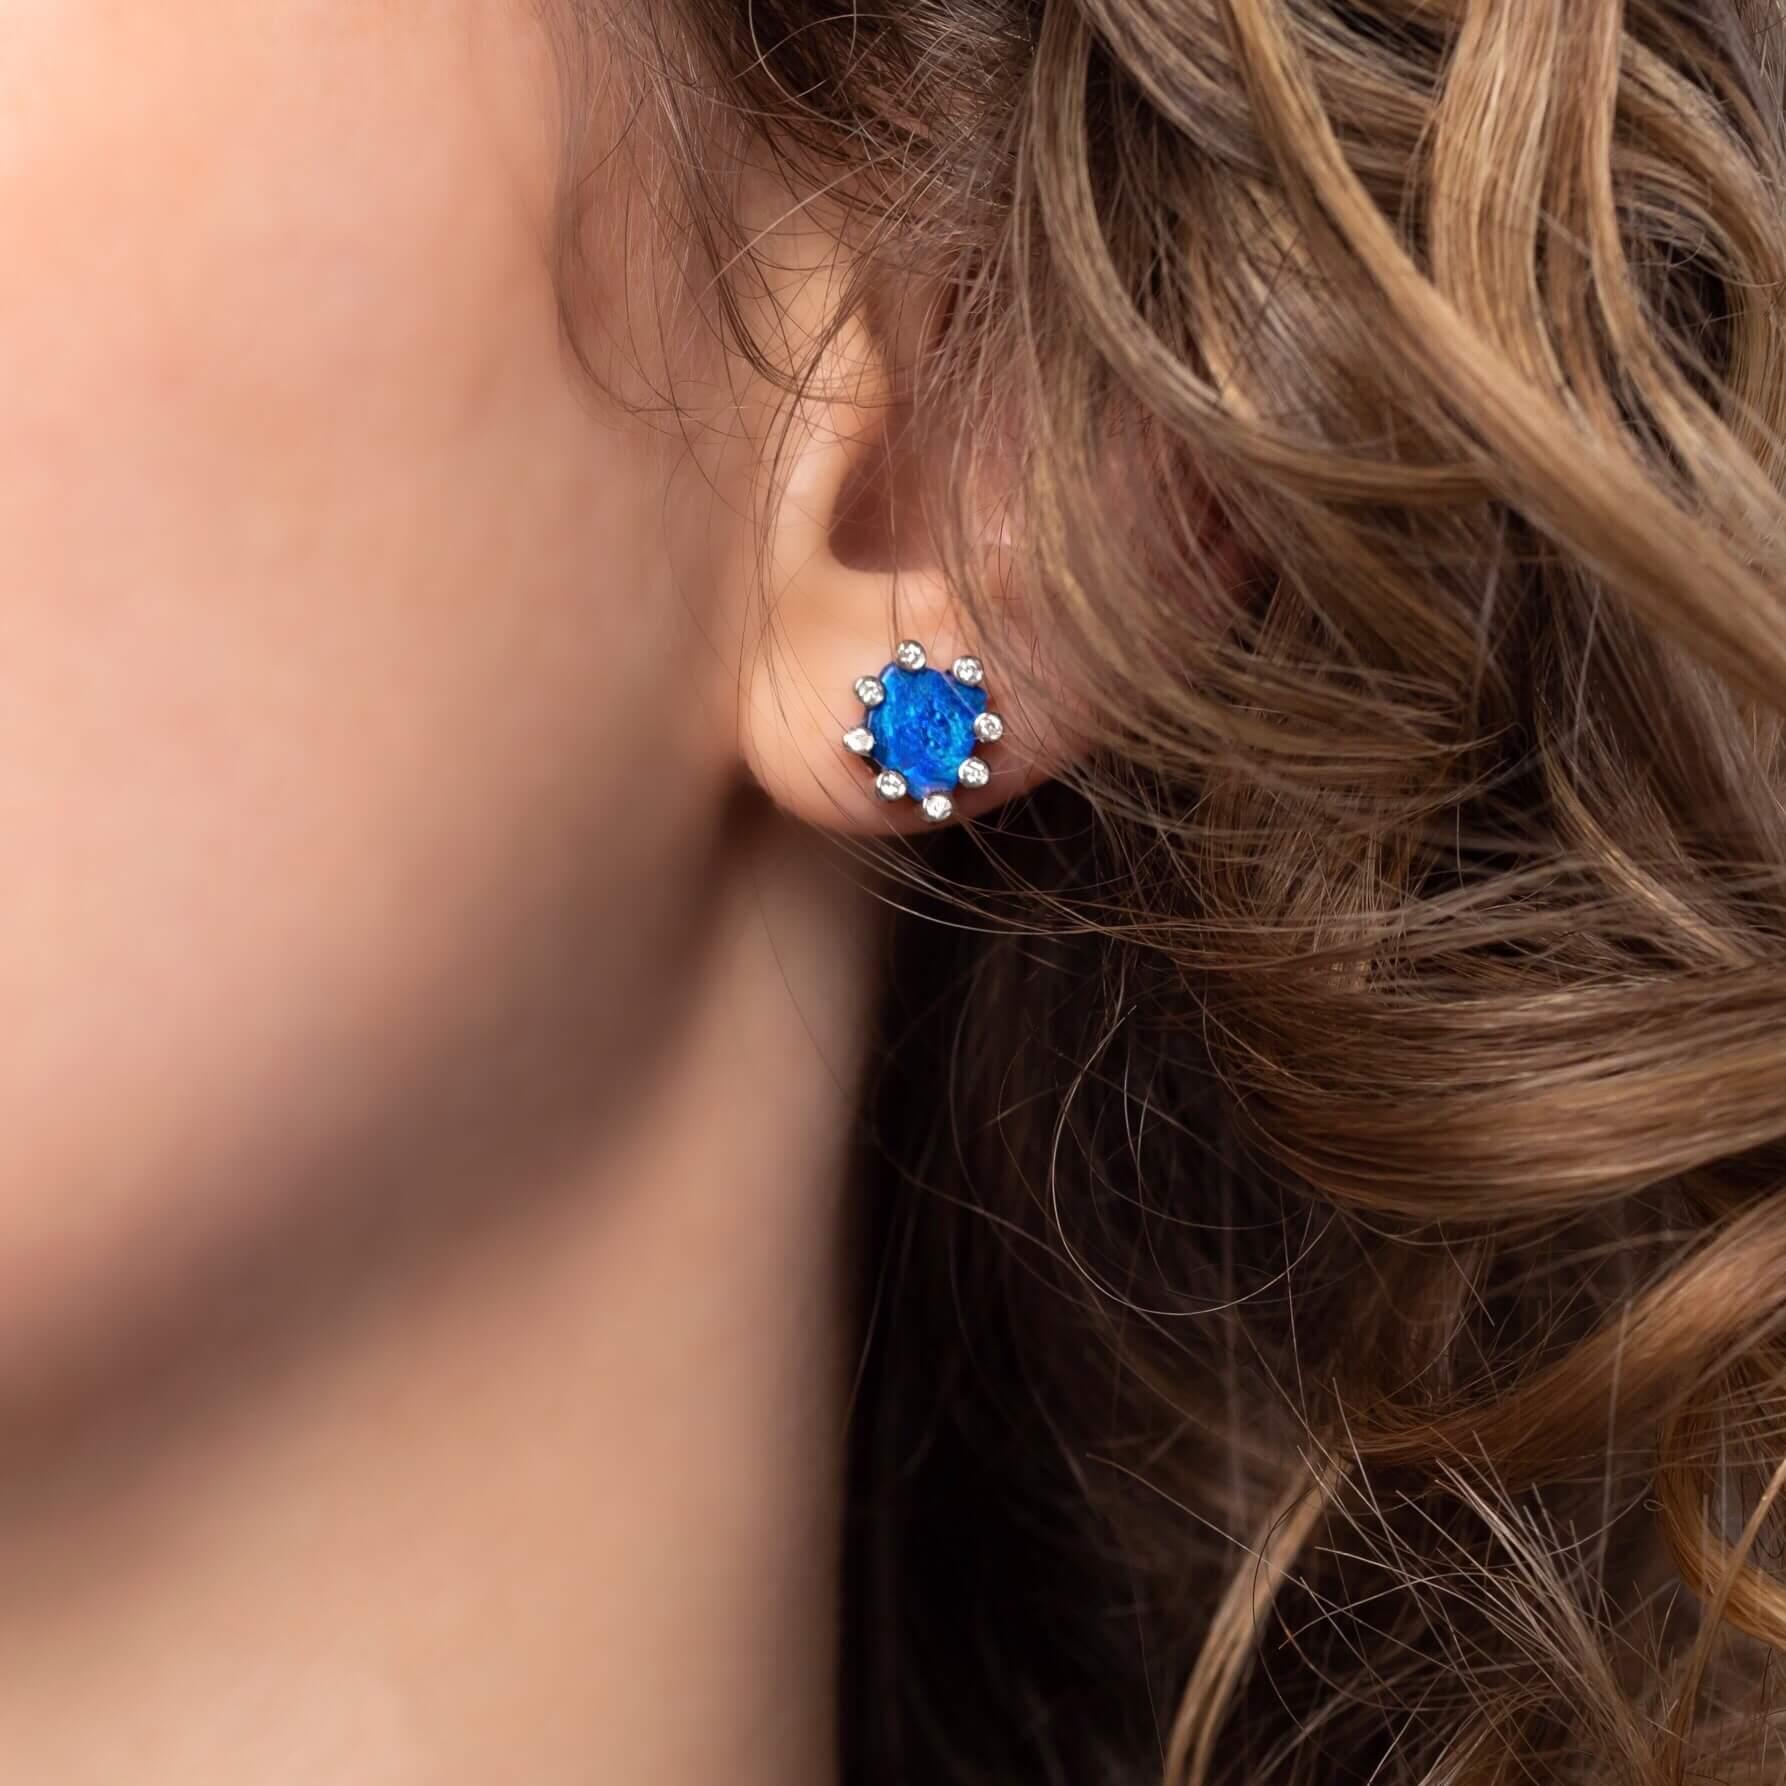 “Yes & No” opal earrings balance the contemporary against the classic. Beautiful deep blue boulder opals (2.15ct) and frosty diamond dots in a cool 18K white gold setting make this piece glamour and fun rolled into one. Designed by Renata Bernard.